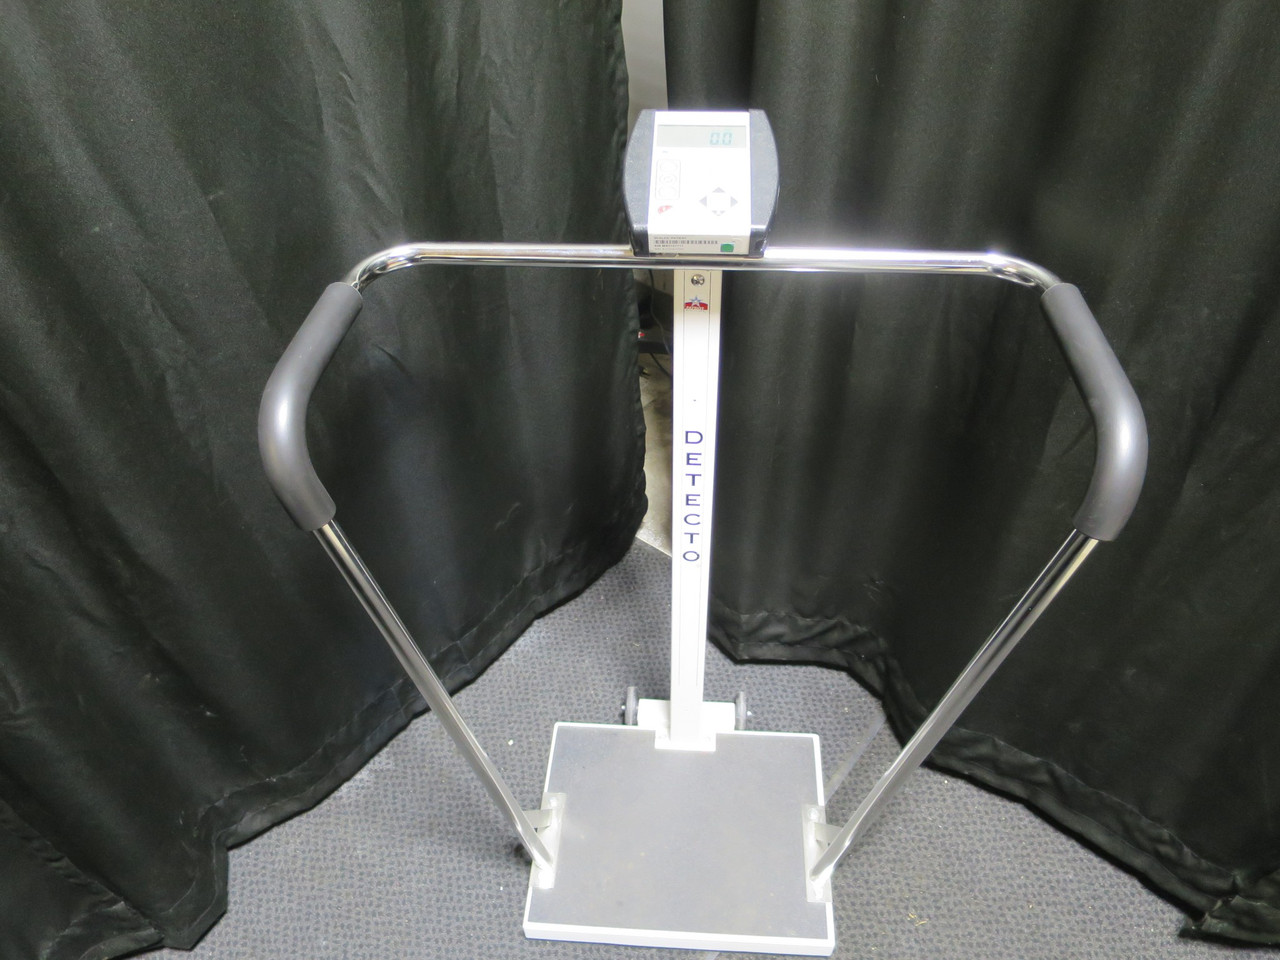 Detecto 6855 Digital Bariatric Scale with Model 750 Weight Indicator